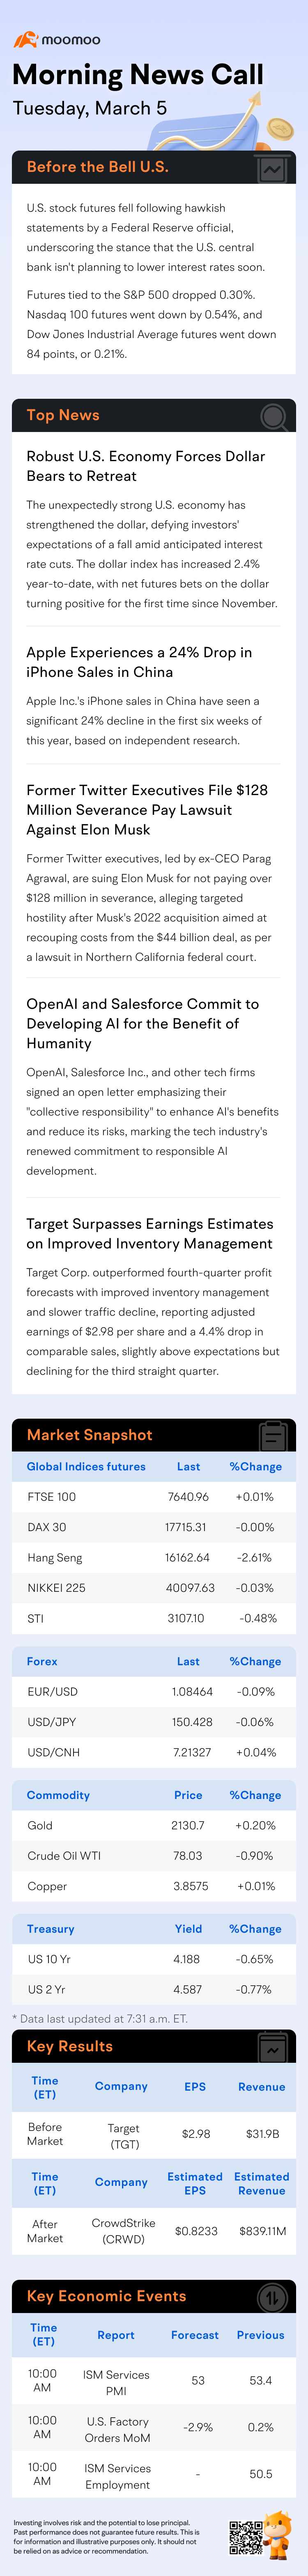 Morning News Call | Stock Futures Dip Pre-Market; Target Rises on Earnings Beat